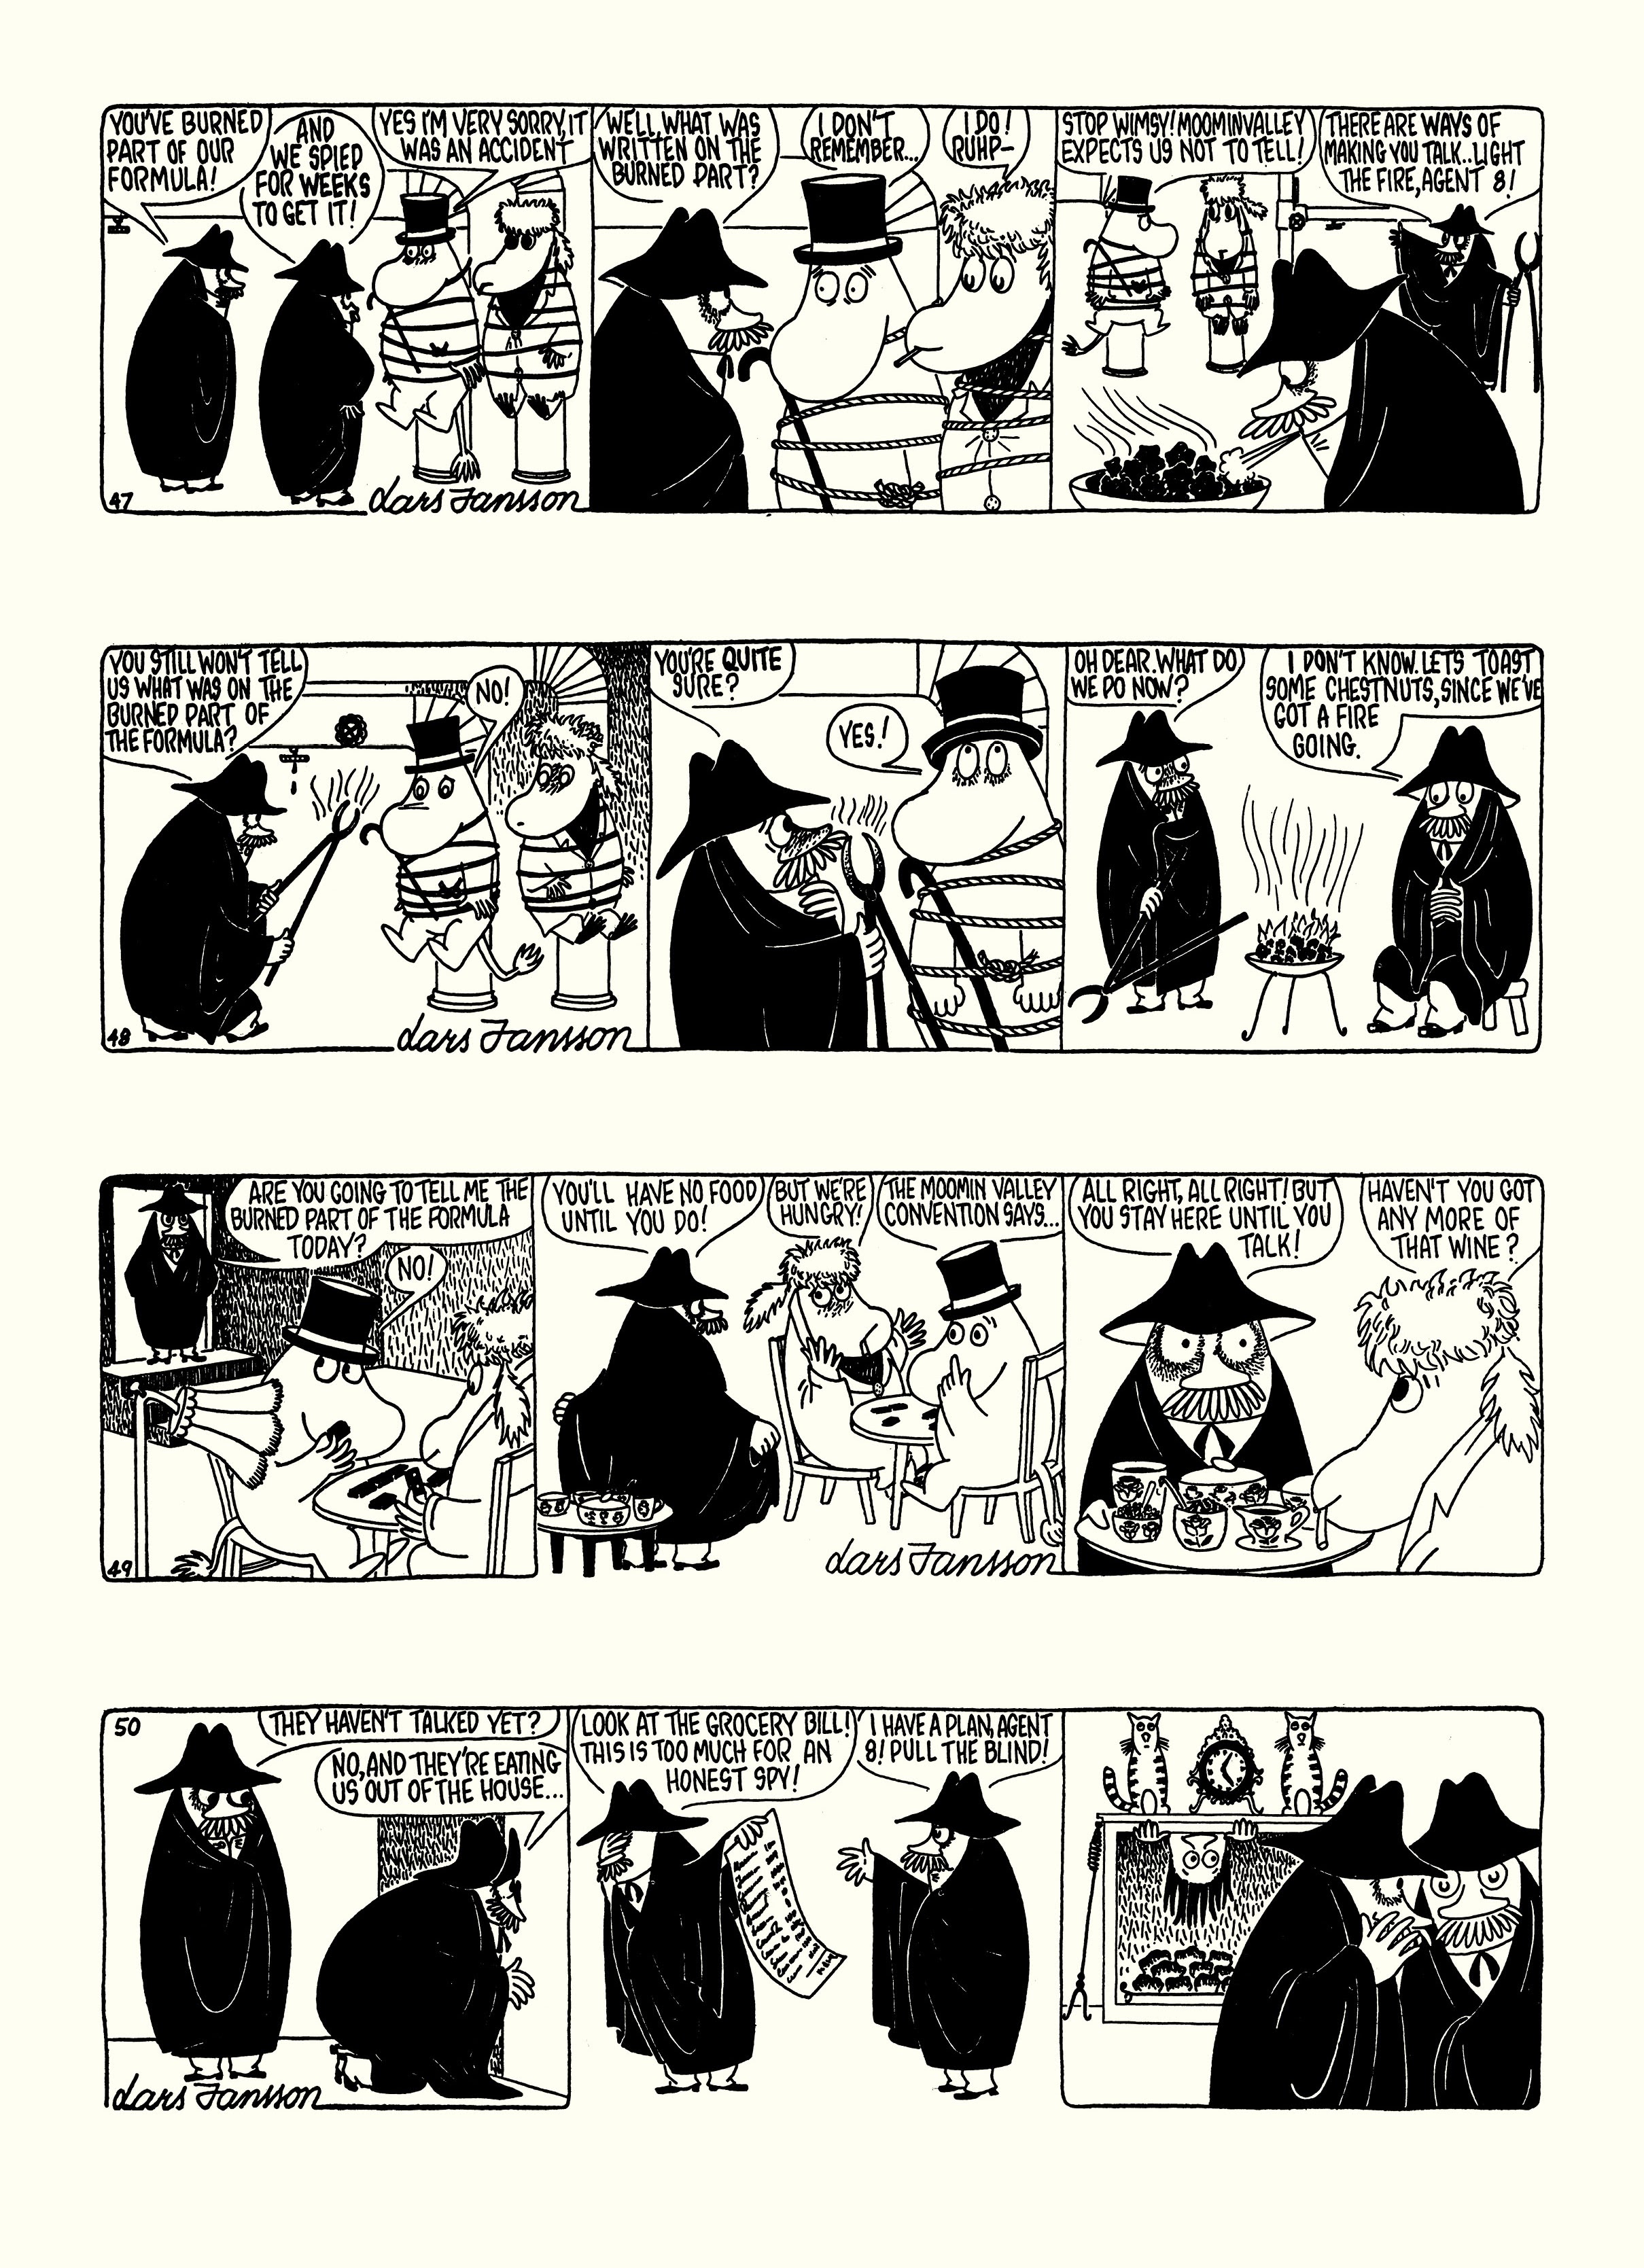 Read online Moomin: The Complete Lars Jansson Comic Strip comic -  Issue # TPB 6 - 59